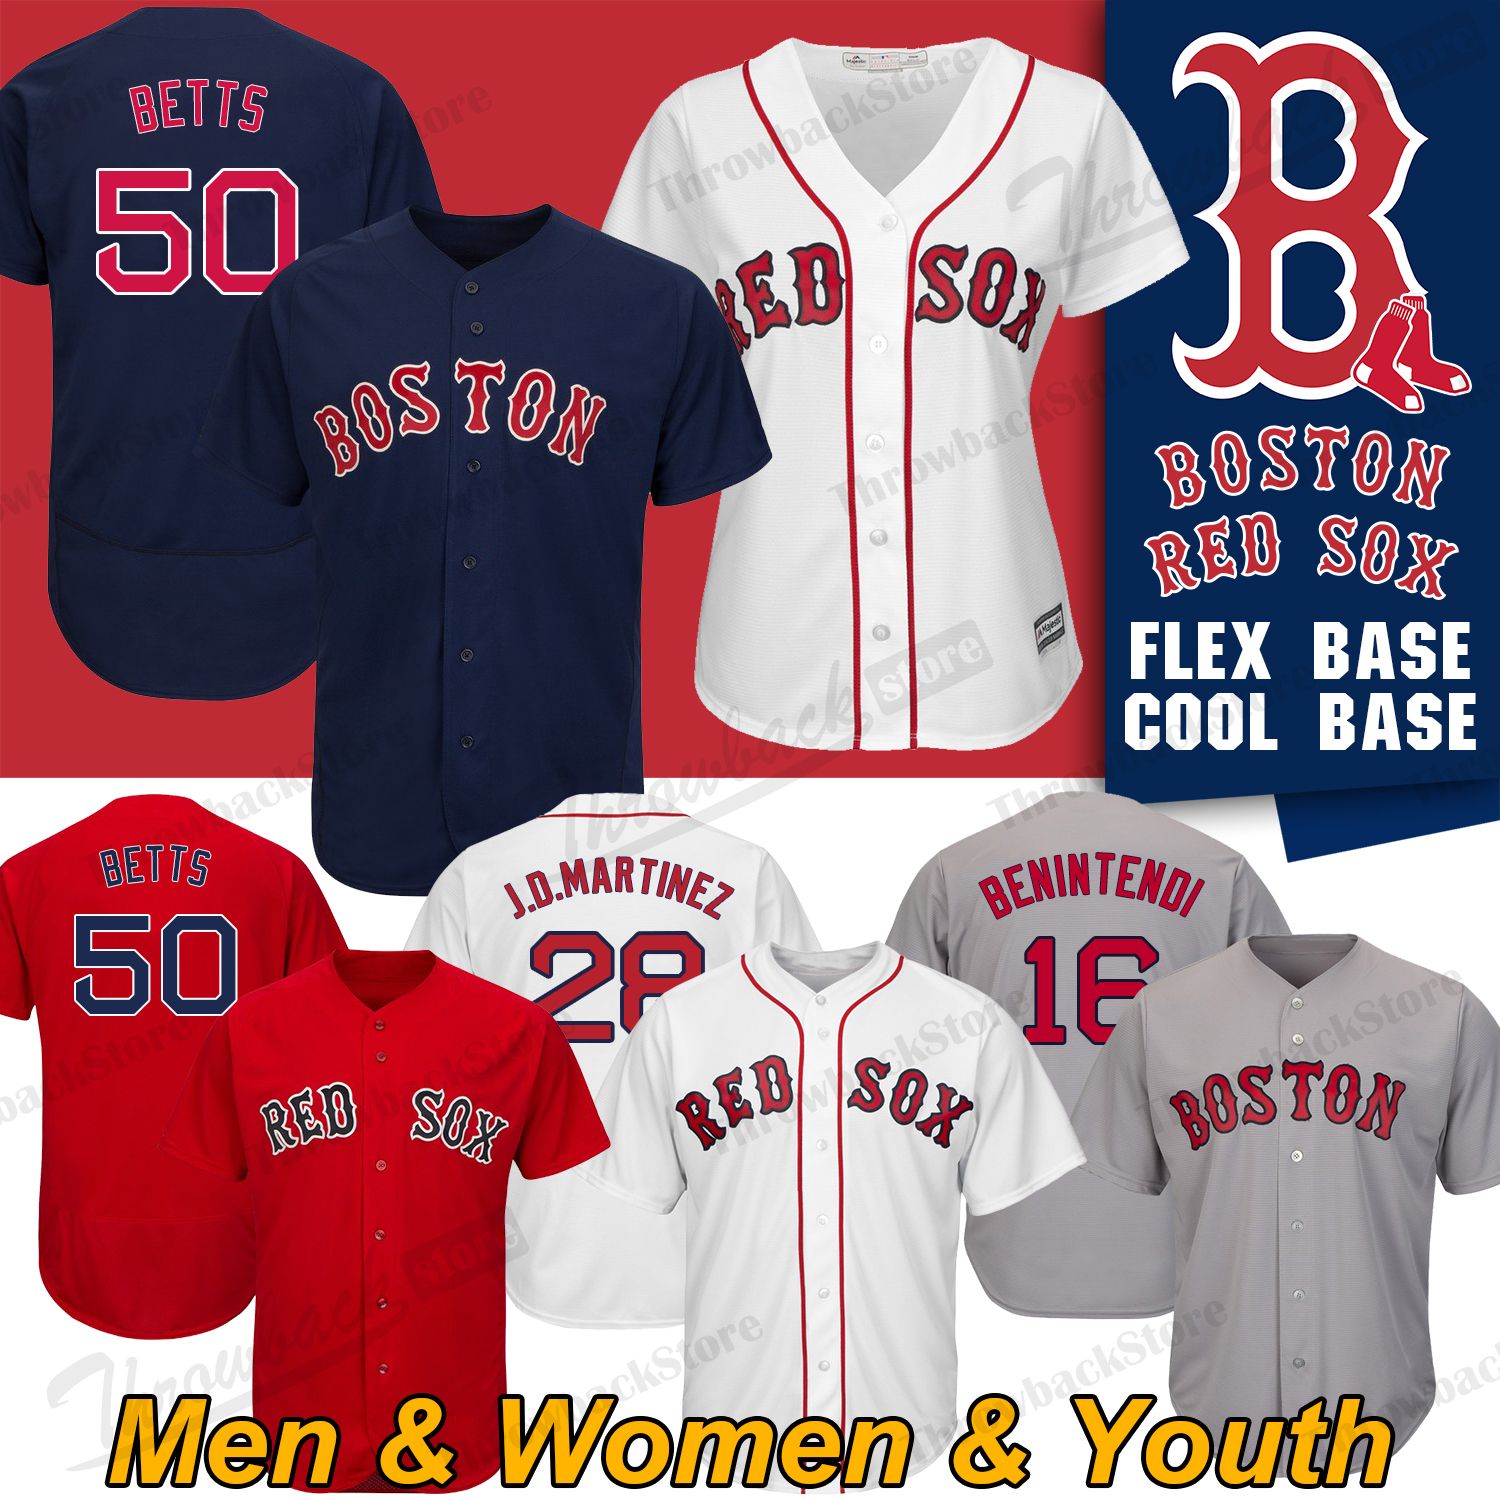 red sox shopping online